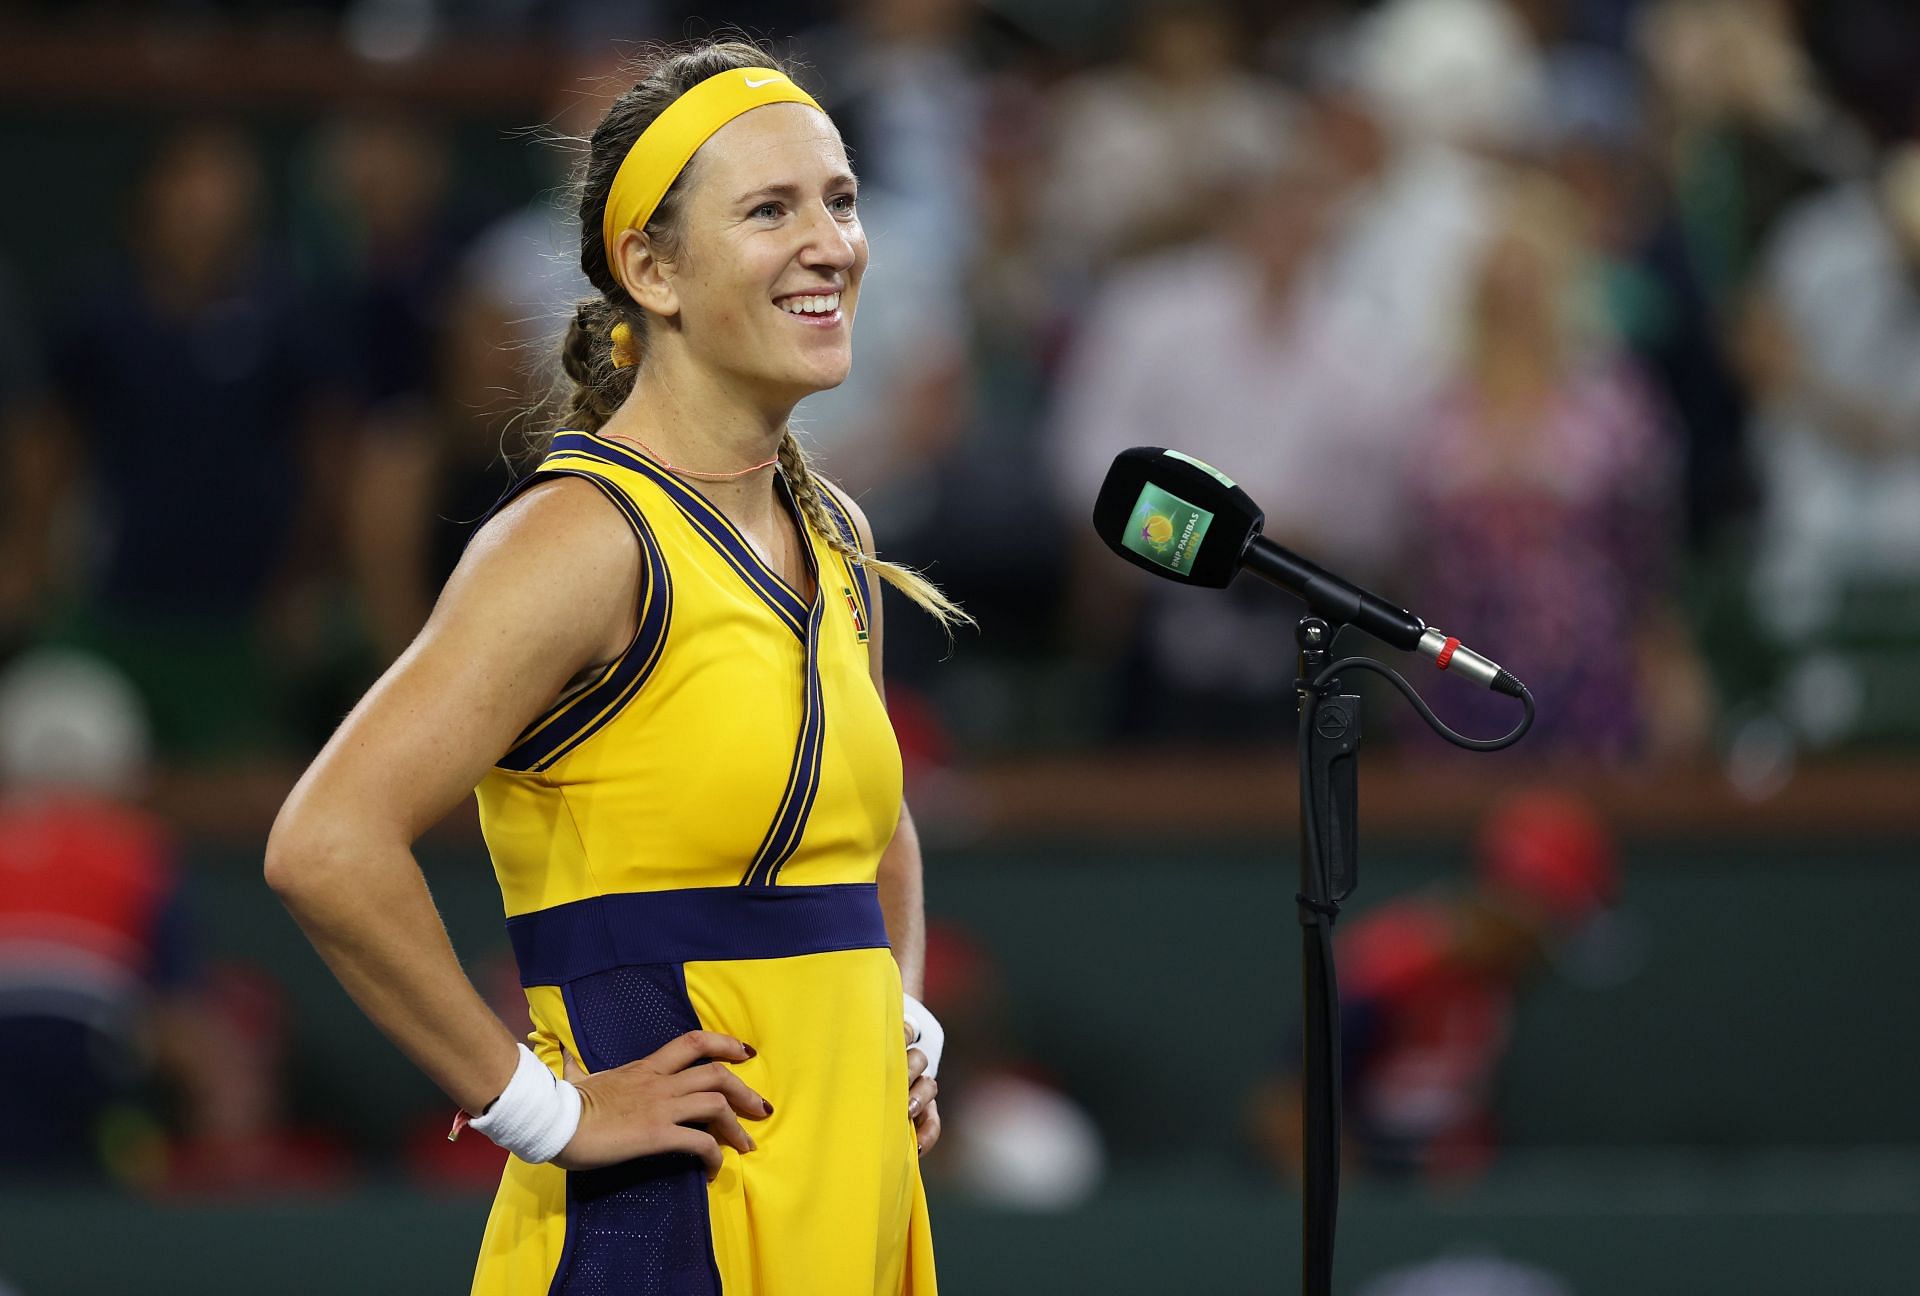 Victoria Azarenka speaks to the crowd after a win at the BNP Paribas Open